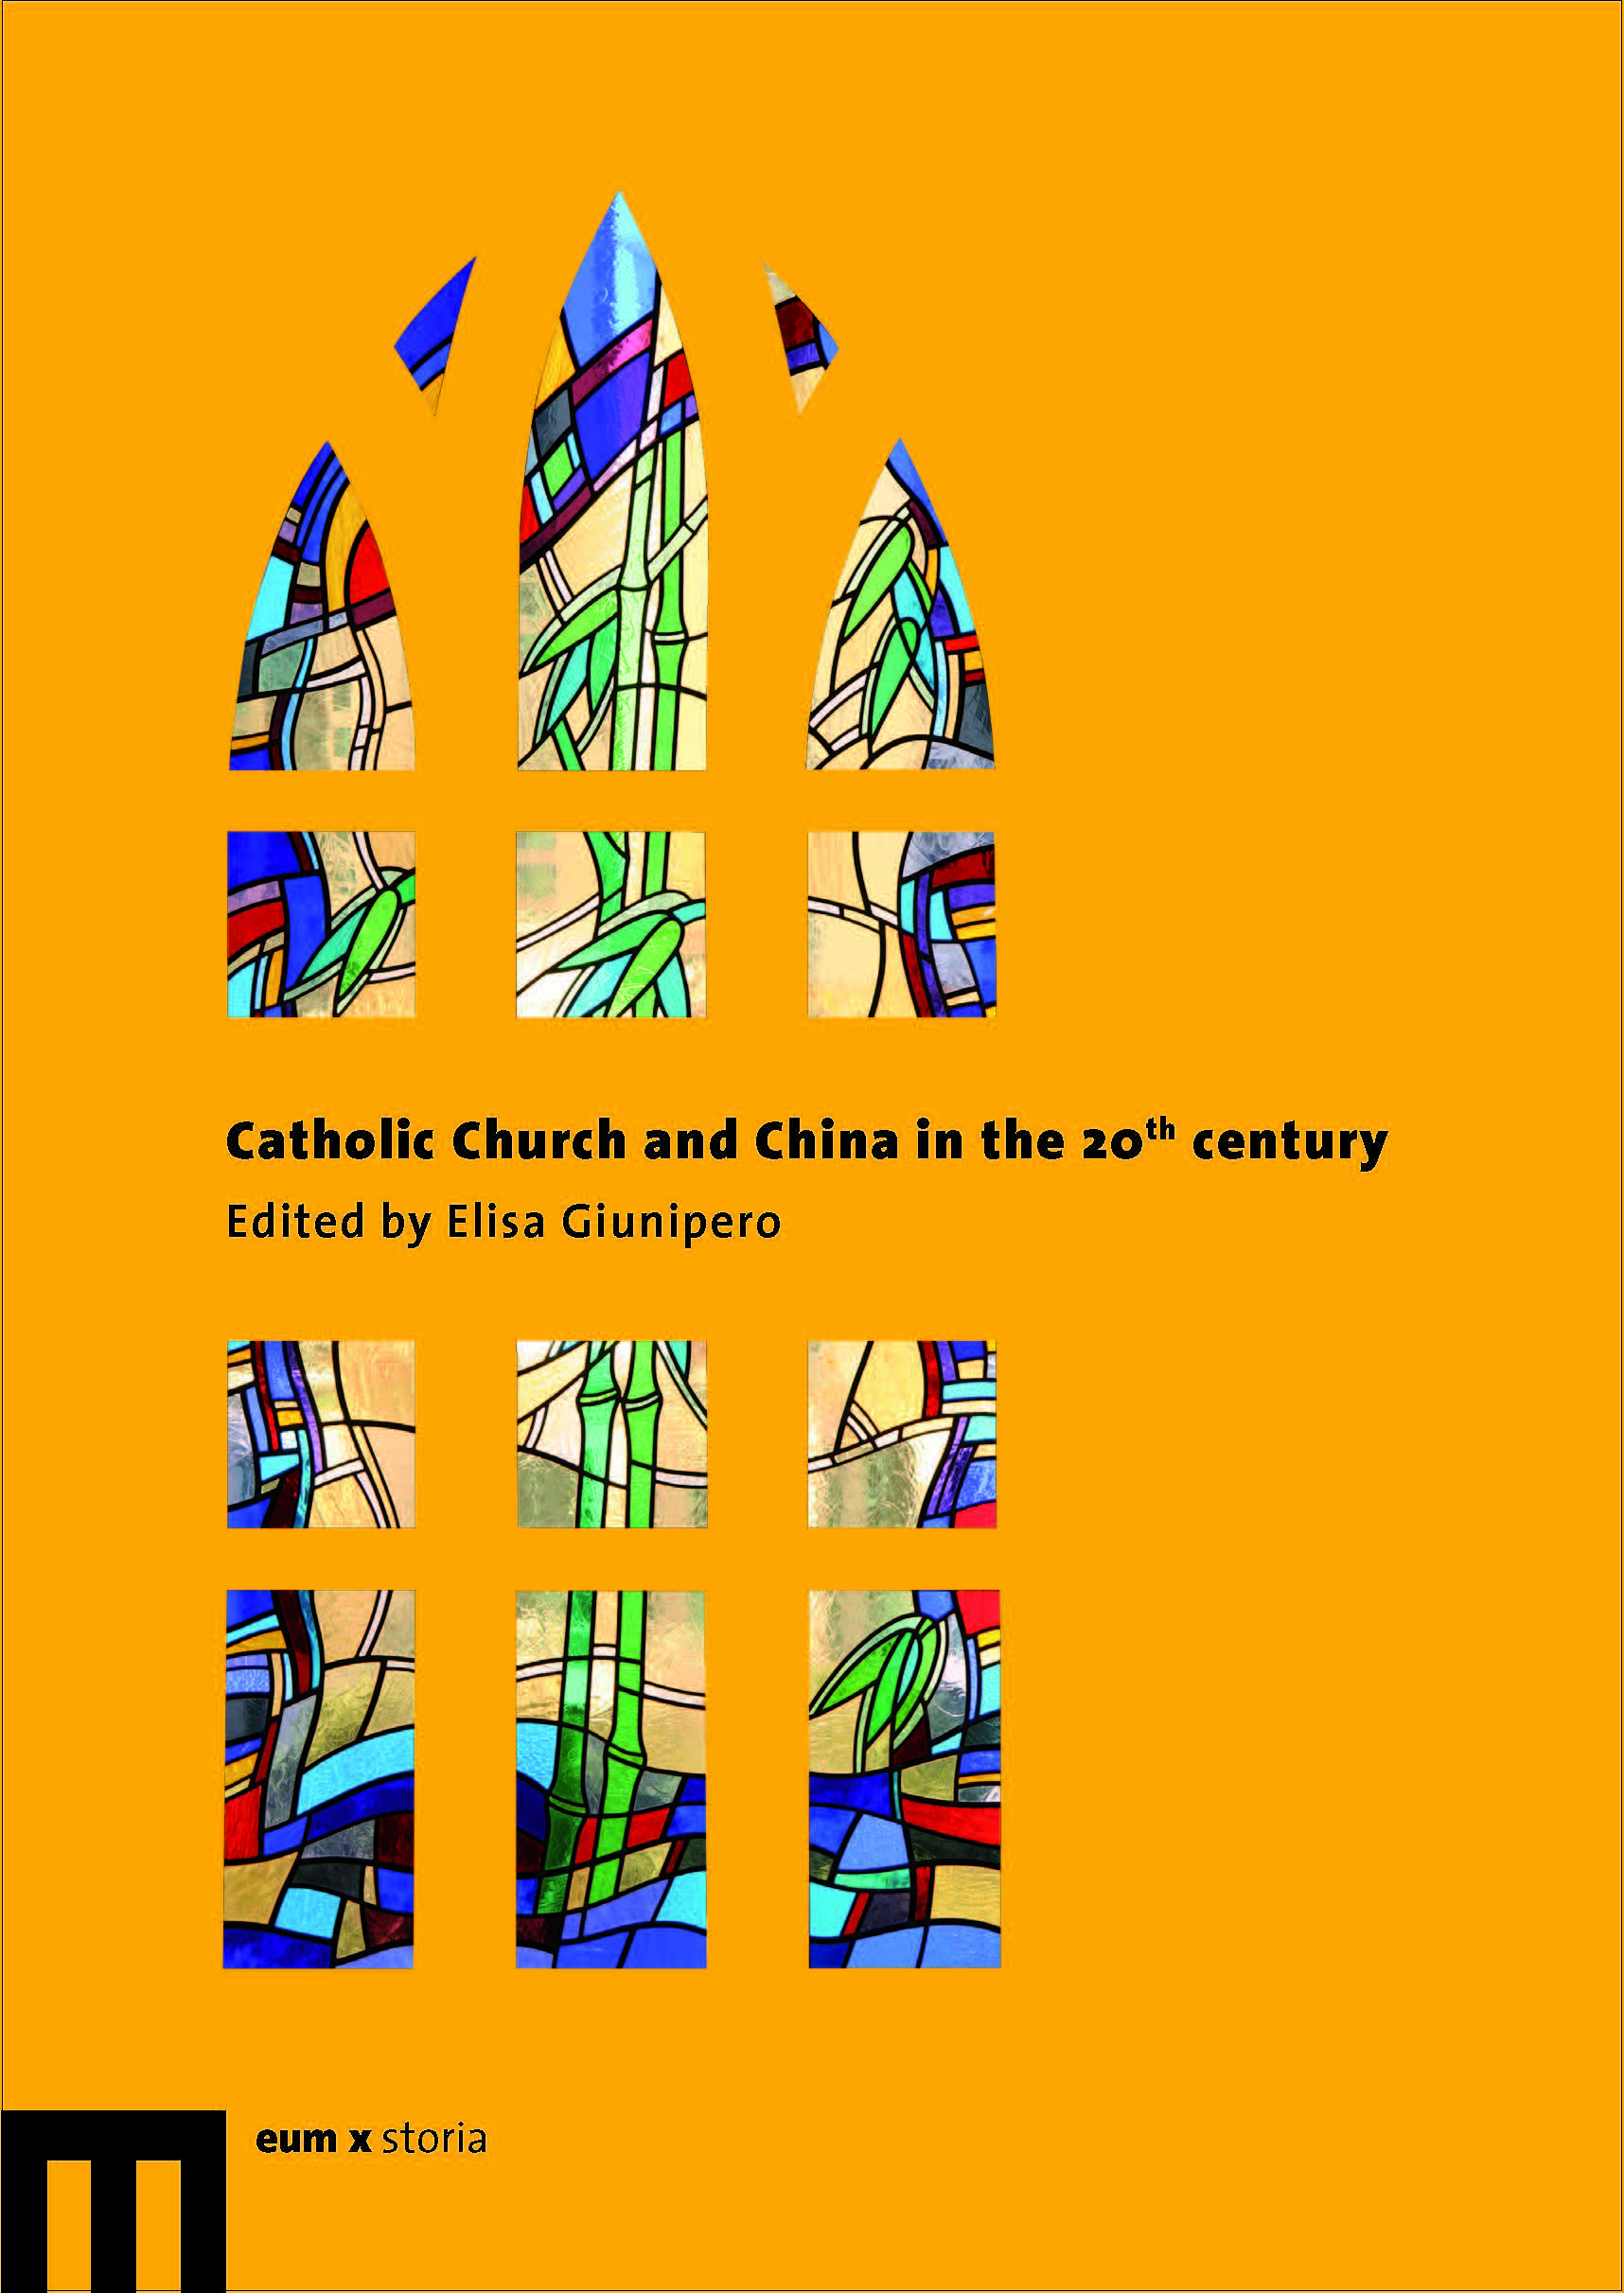 Catholic Church and China in the 20th century